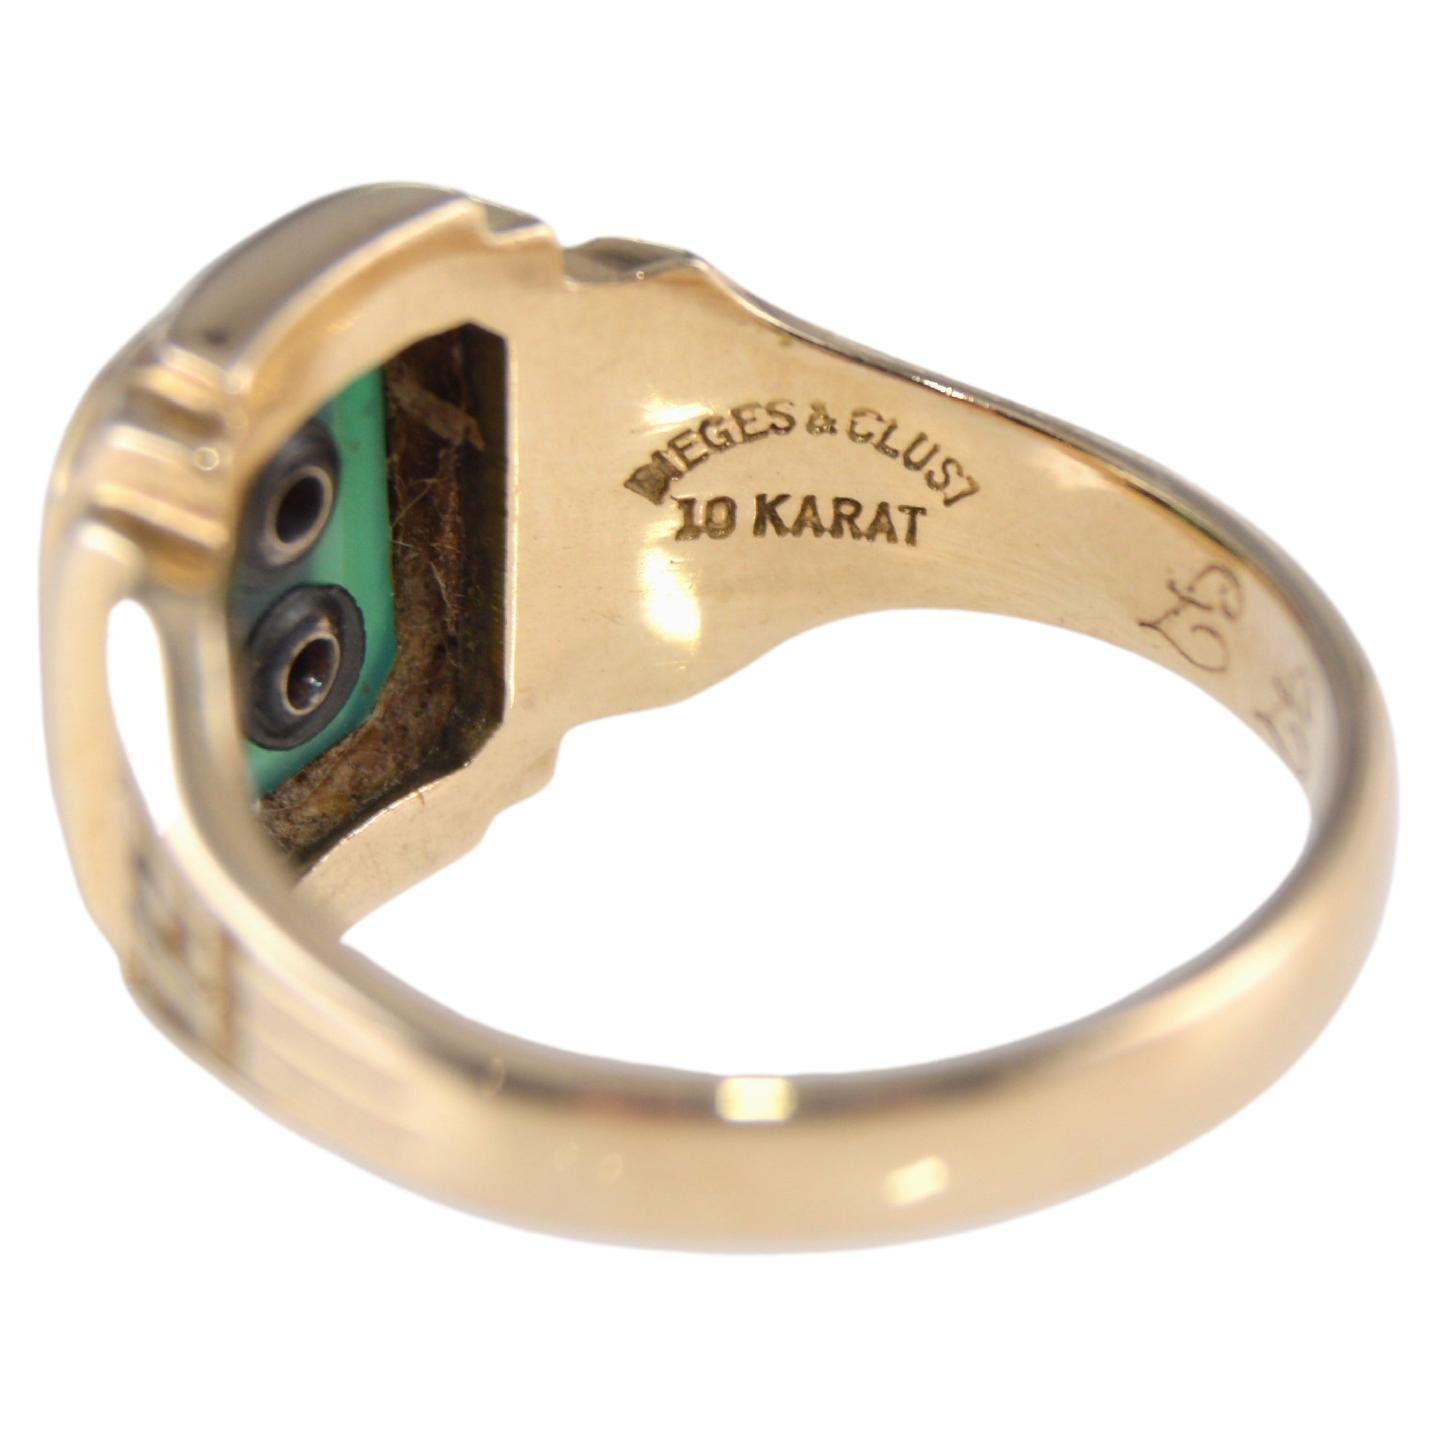 Unisex Art Deco Signet Ring in 10 Karat Solid Gold with Gold Inset from 1953 For Sale 8